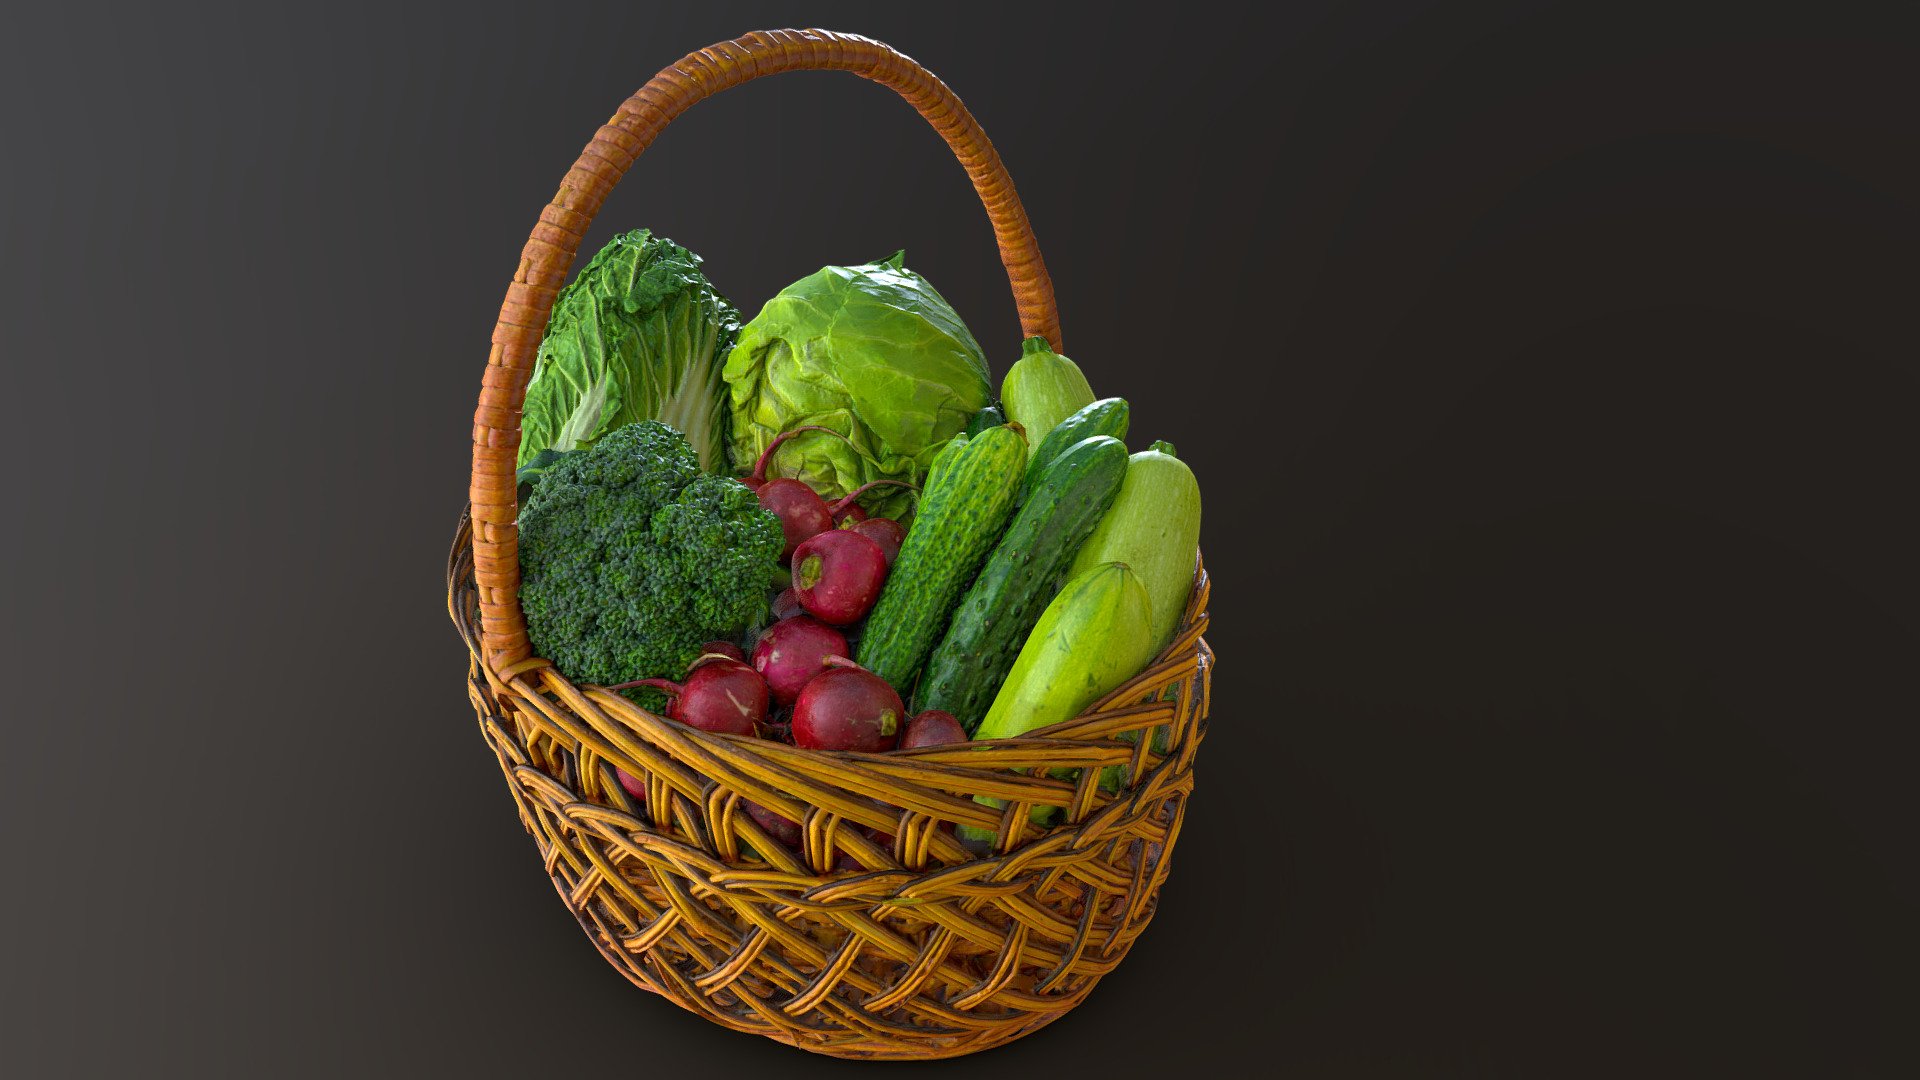 Nowadays, it's harder and harder to get natural and fresh vegetables. Take care of nature, and you will be rewarded with food, cure and happiness.
Created for RealityCapture Eearth Day challenge.

RealityCapture, PPI.
Nikon D5300 + Nikkor 35mm, 320 photos. 
38.3m tris raw mesh, decimated to 200k.
Normal map bake in RC.

8k textures (Diffuse+Norman+Roughness) - Vegetable set - 3D model by Vitalii Uspalenko (@Vitalii_Uspalenko) 3d model